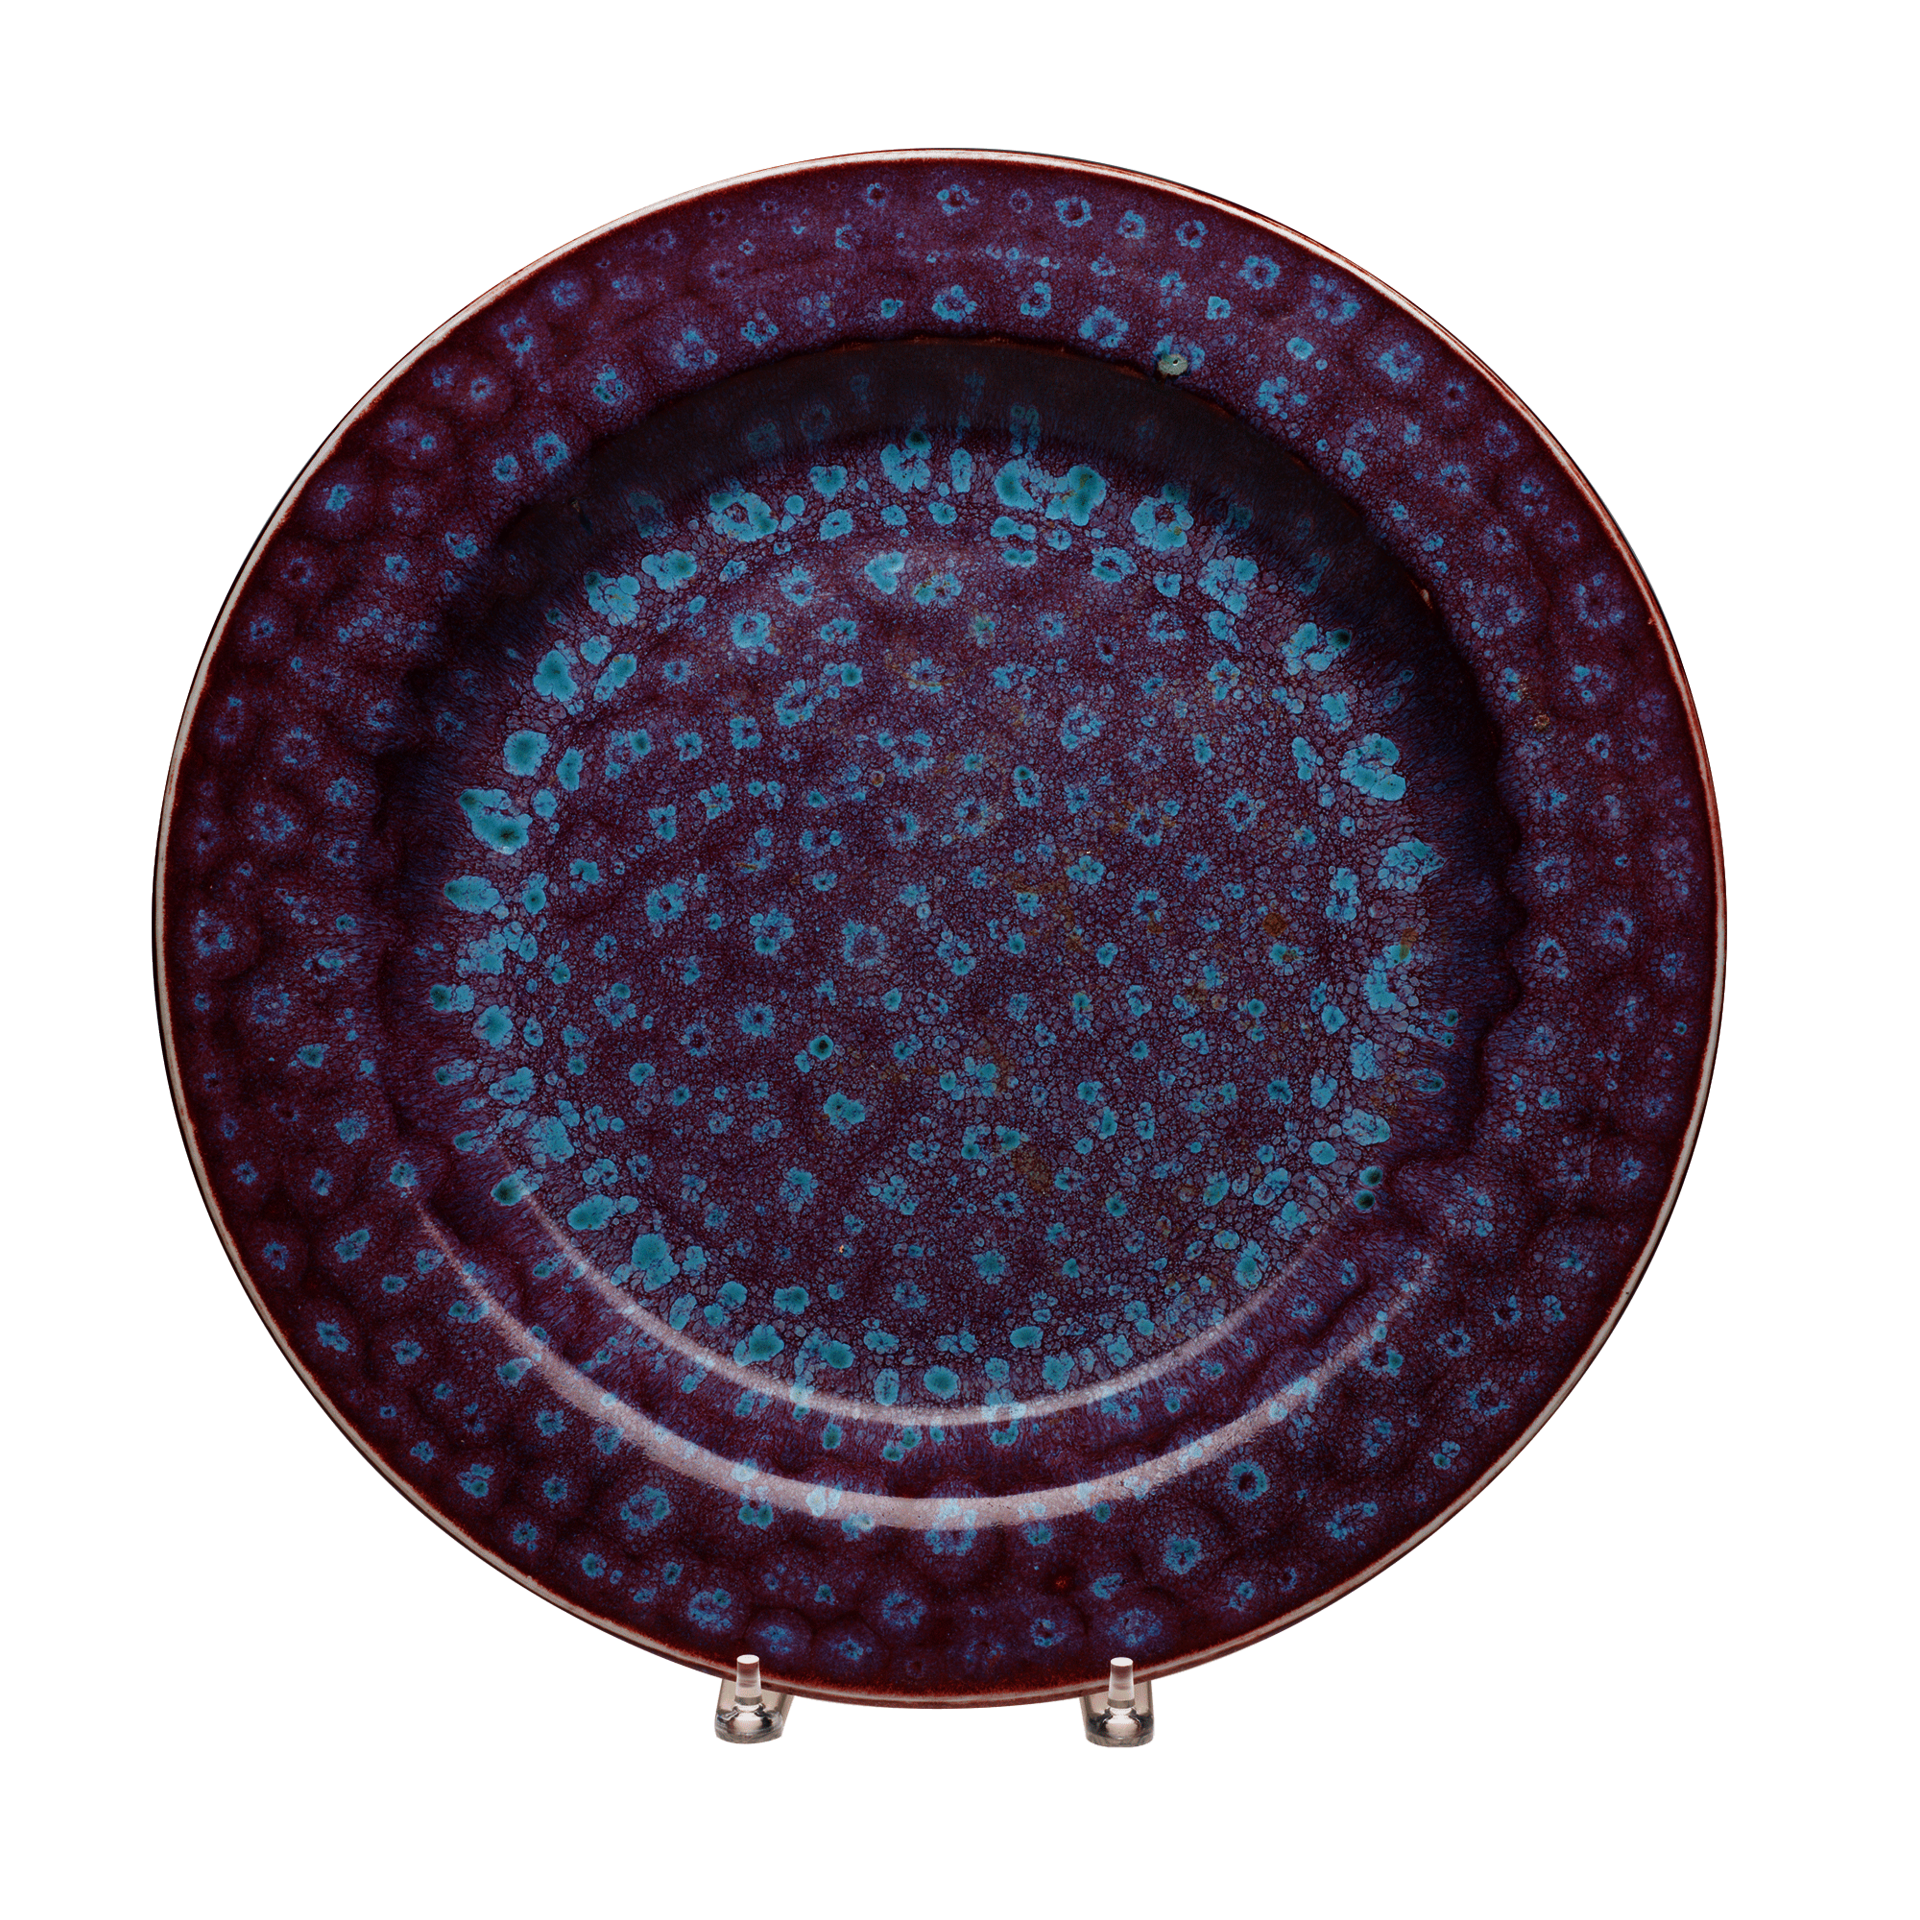 Round porcelain plate with purple and blue speckled glaze